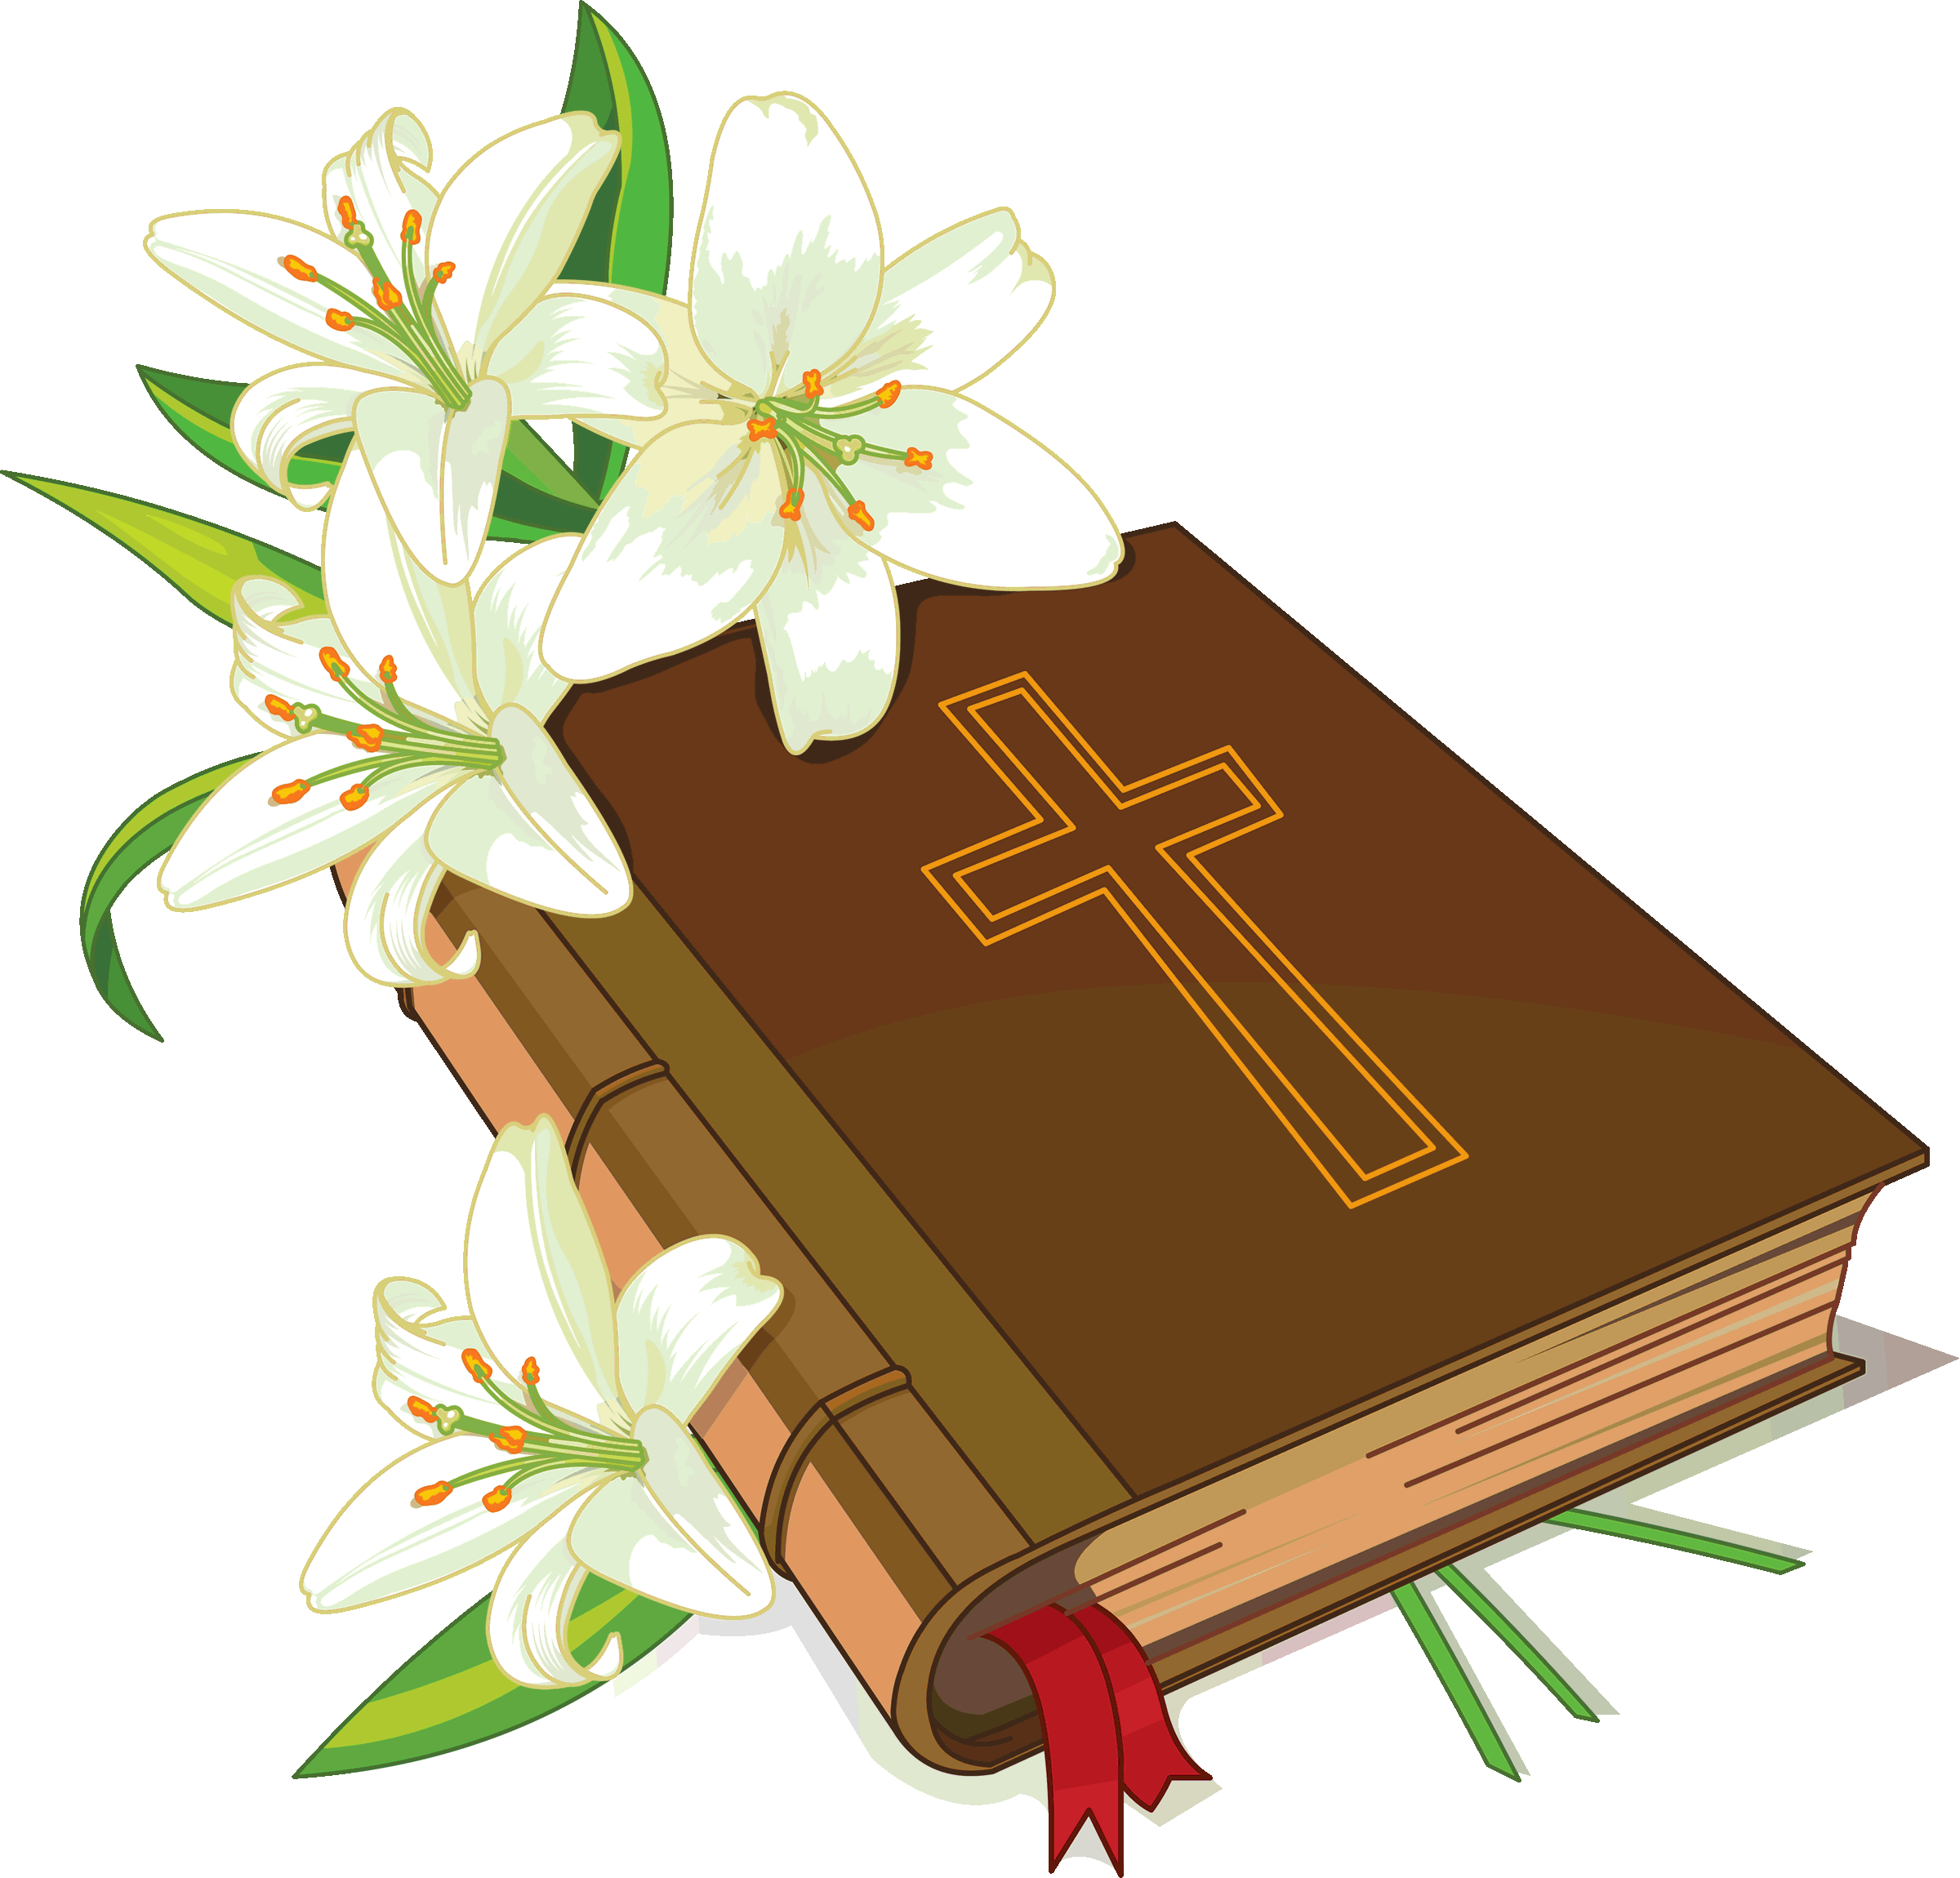 Download Christian Bible And Flowers Transparent Image